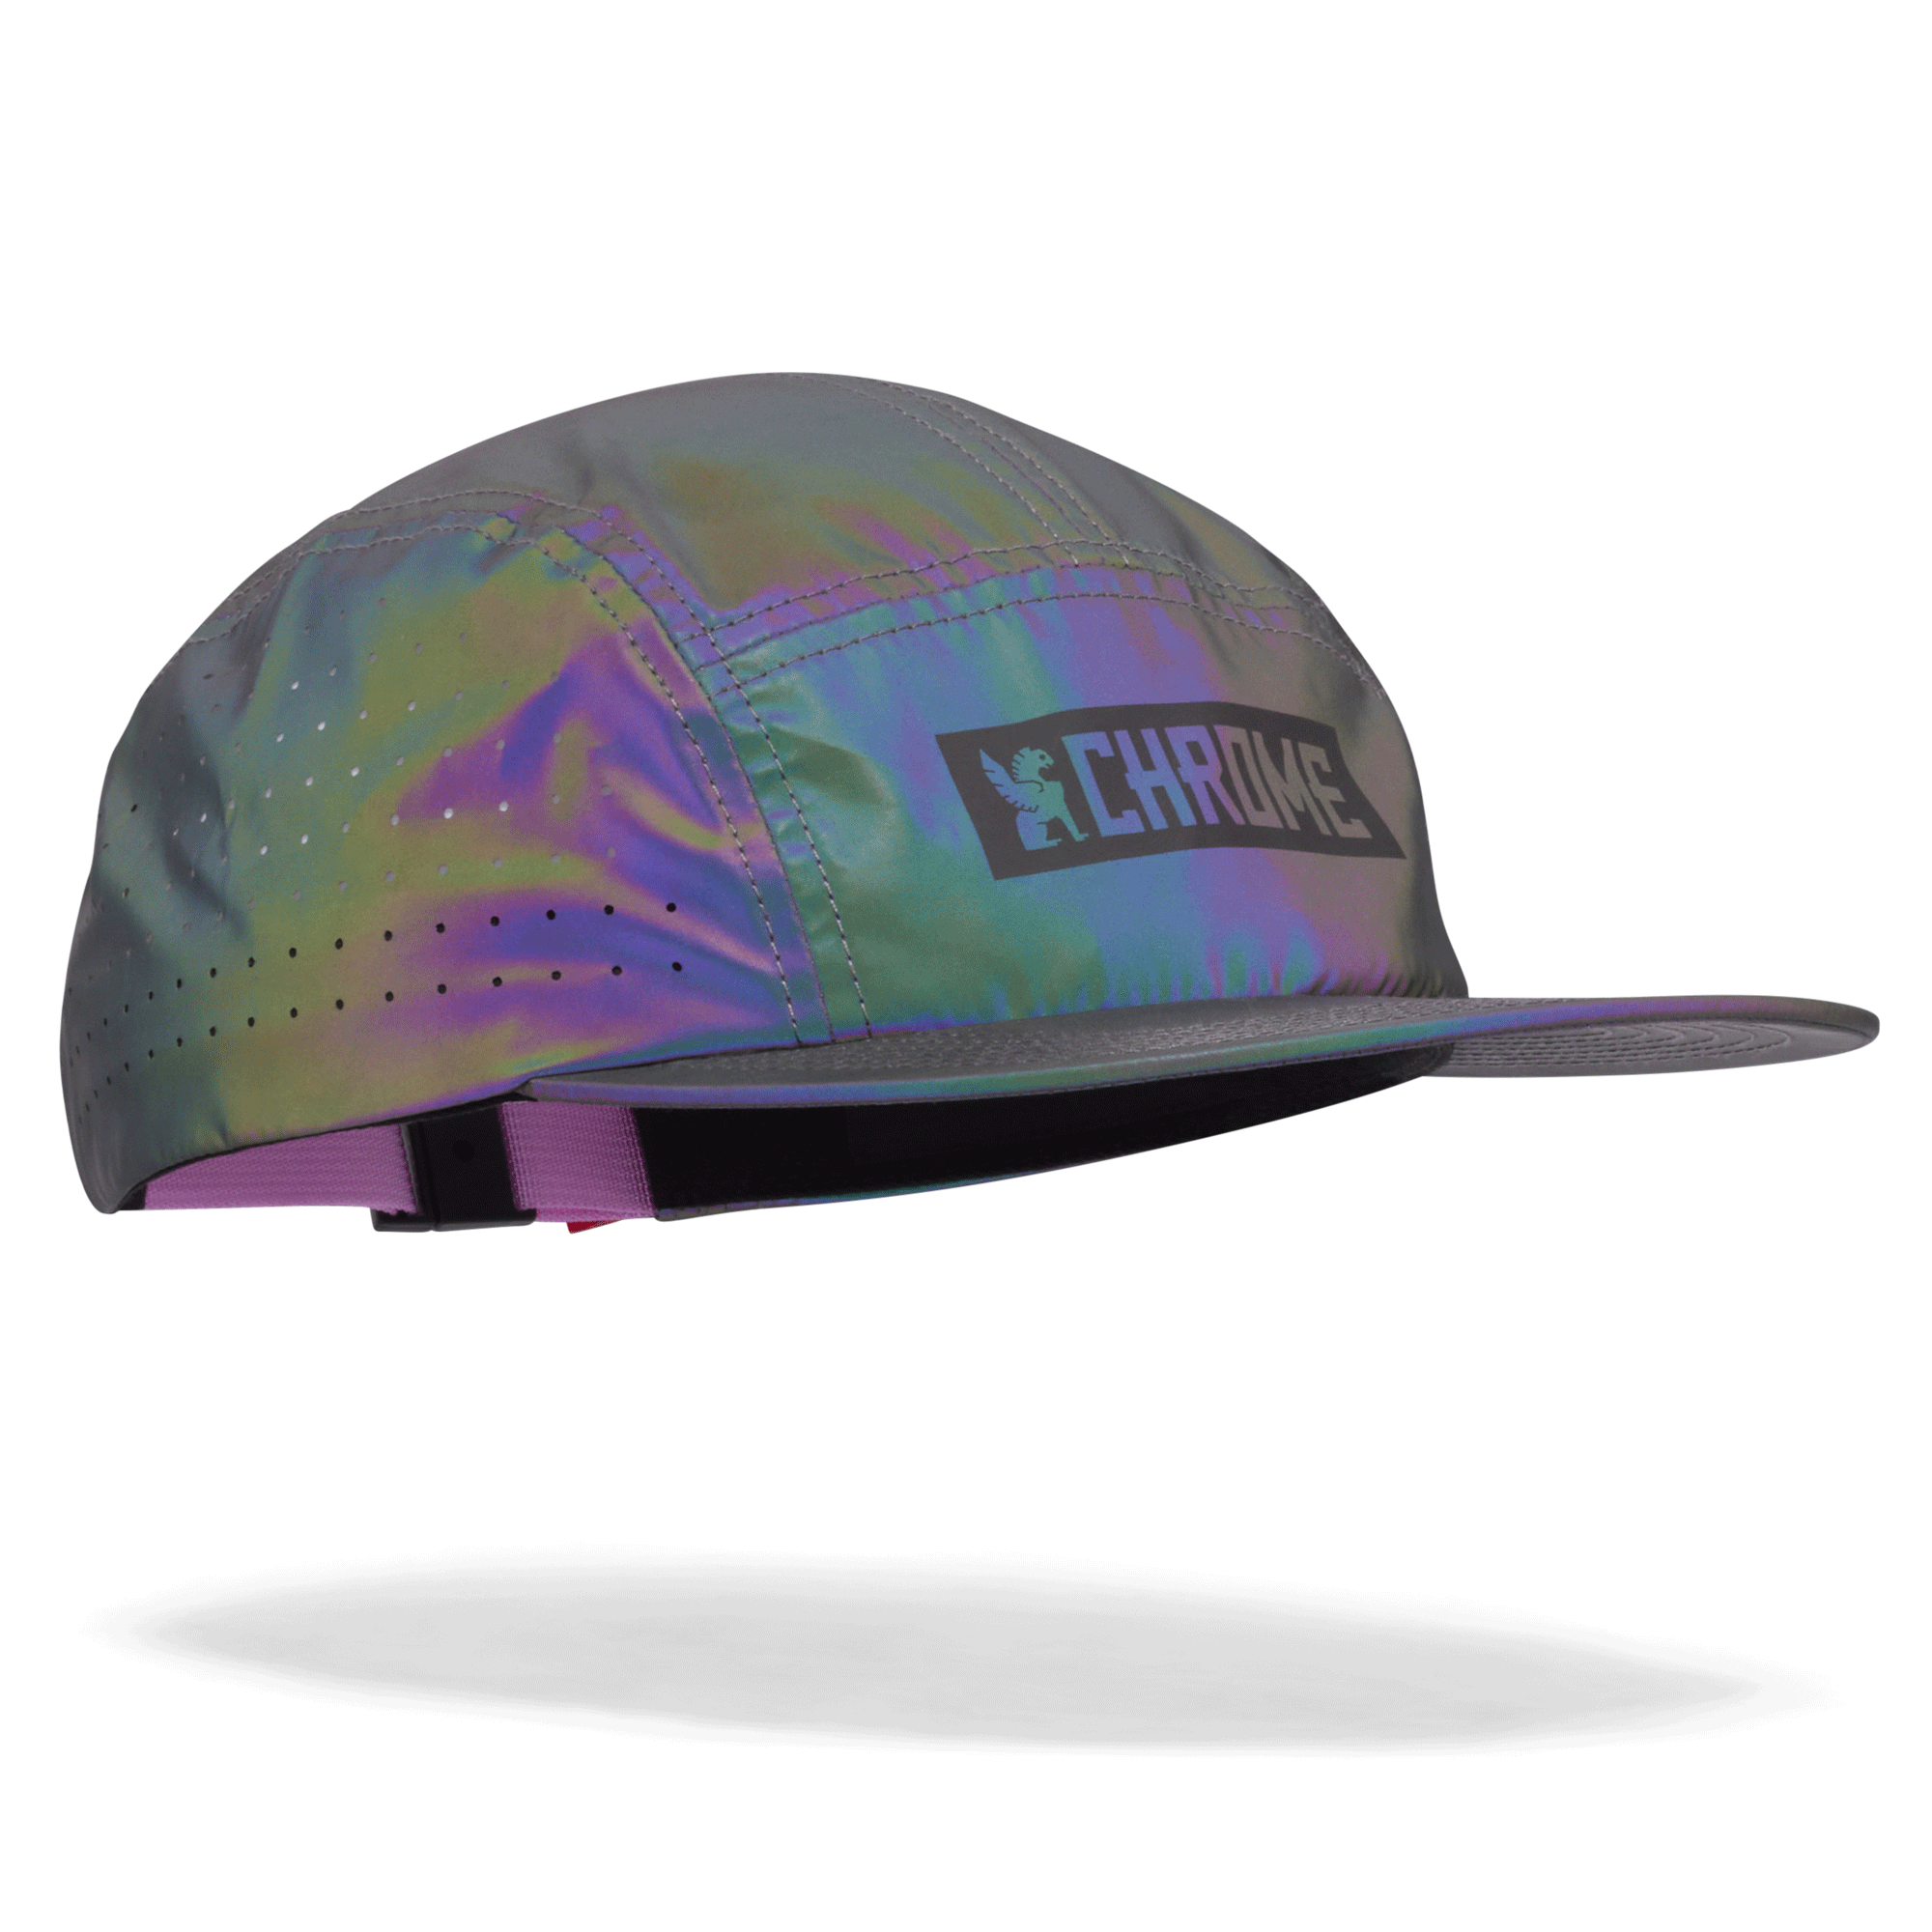 Showing the reflectivity of the rainbow reflective cap #color_rainbow reflective